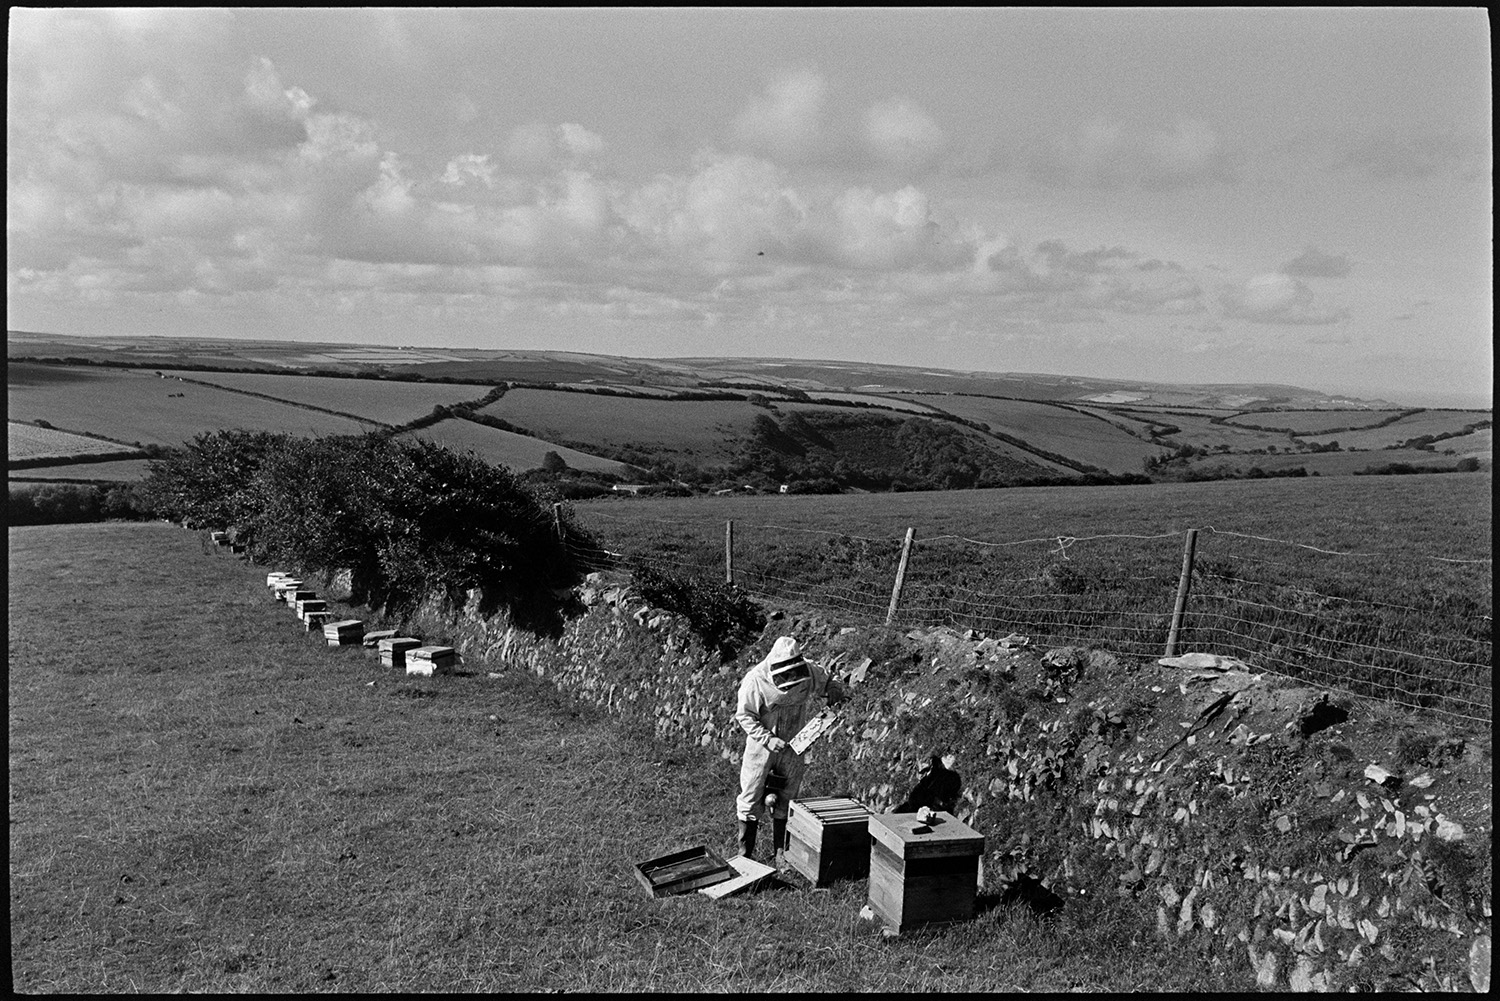 Man tending bees in hives in moorland landscape. 
[Bill Ludgate checking a bee hive by a stone wall in a field near Woody Bay. Other hives can be seen along the wall and a landscape of fields and hedgerows is visible in the background.]